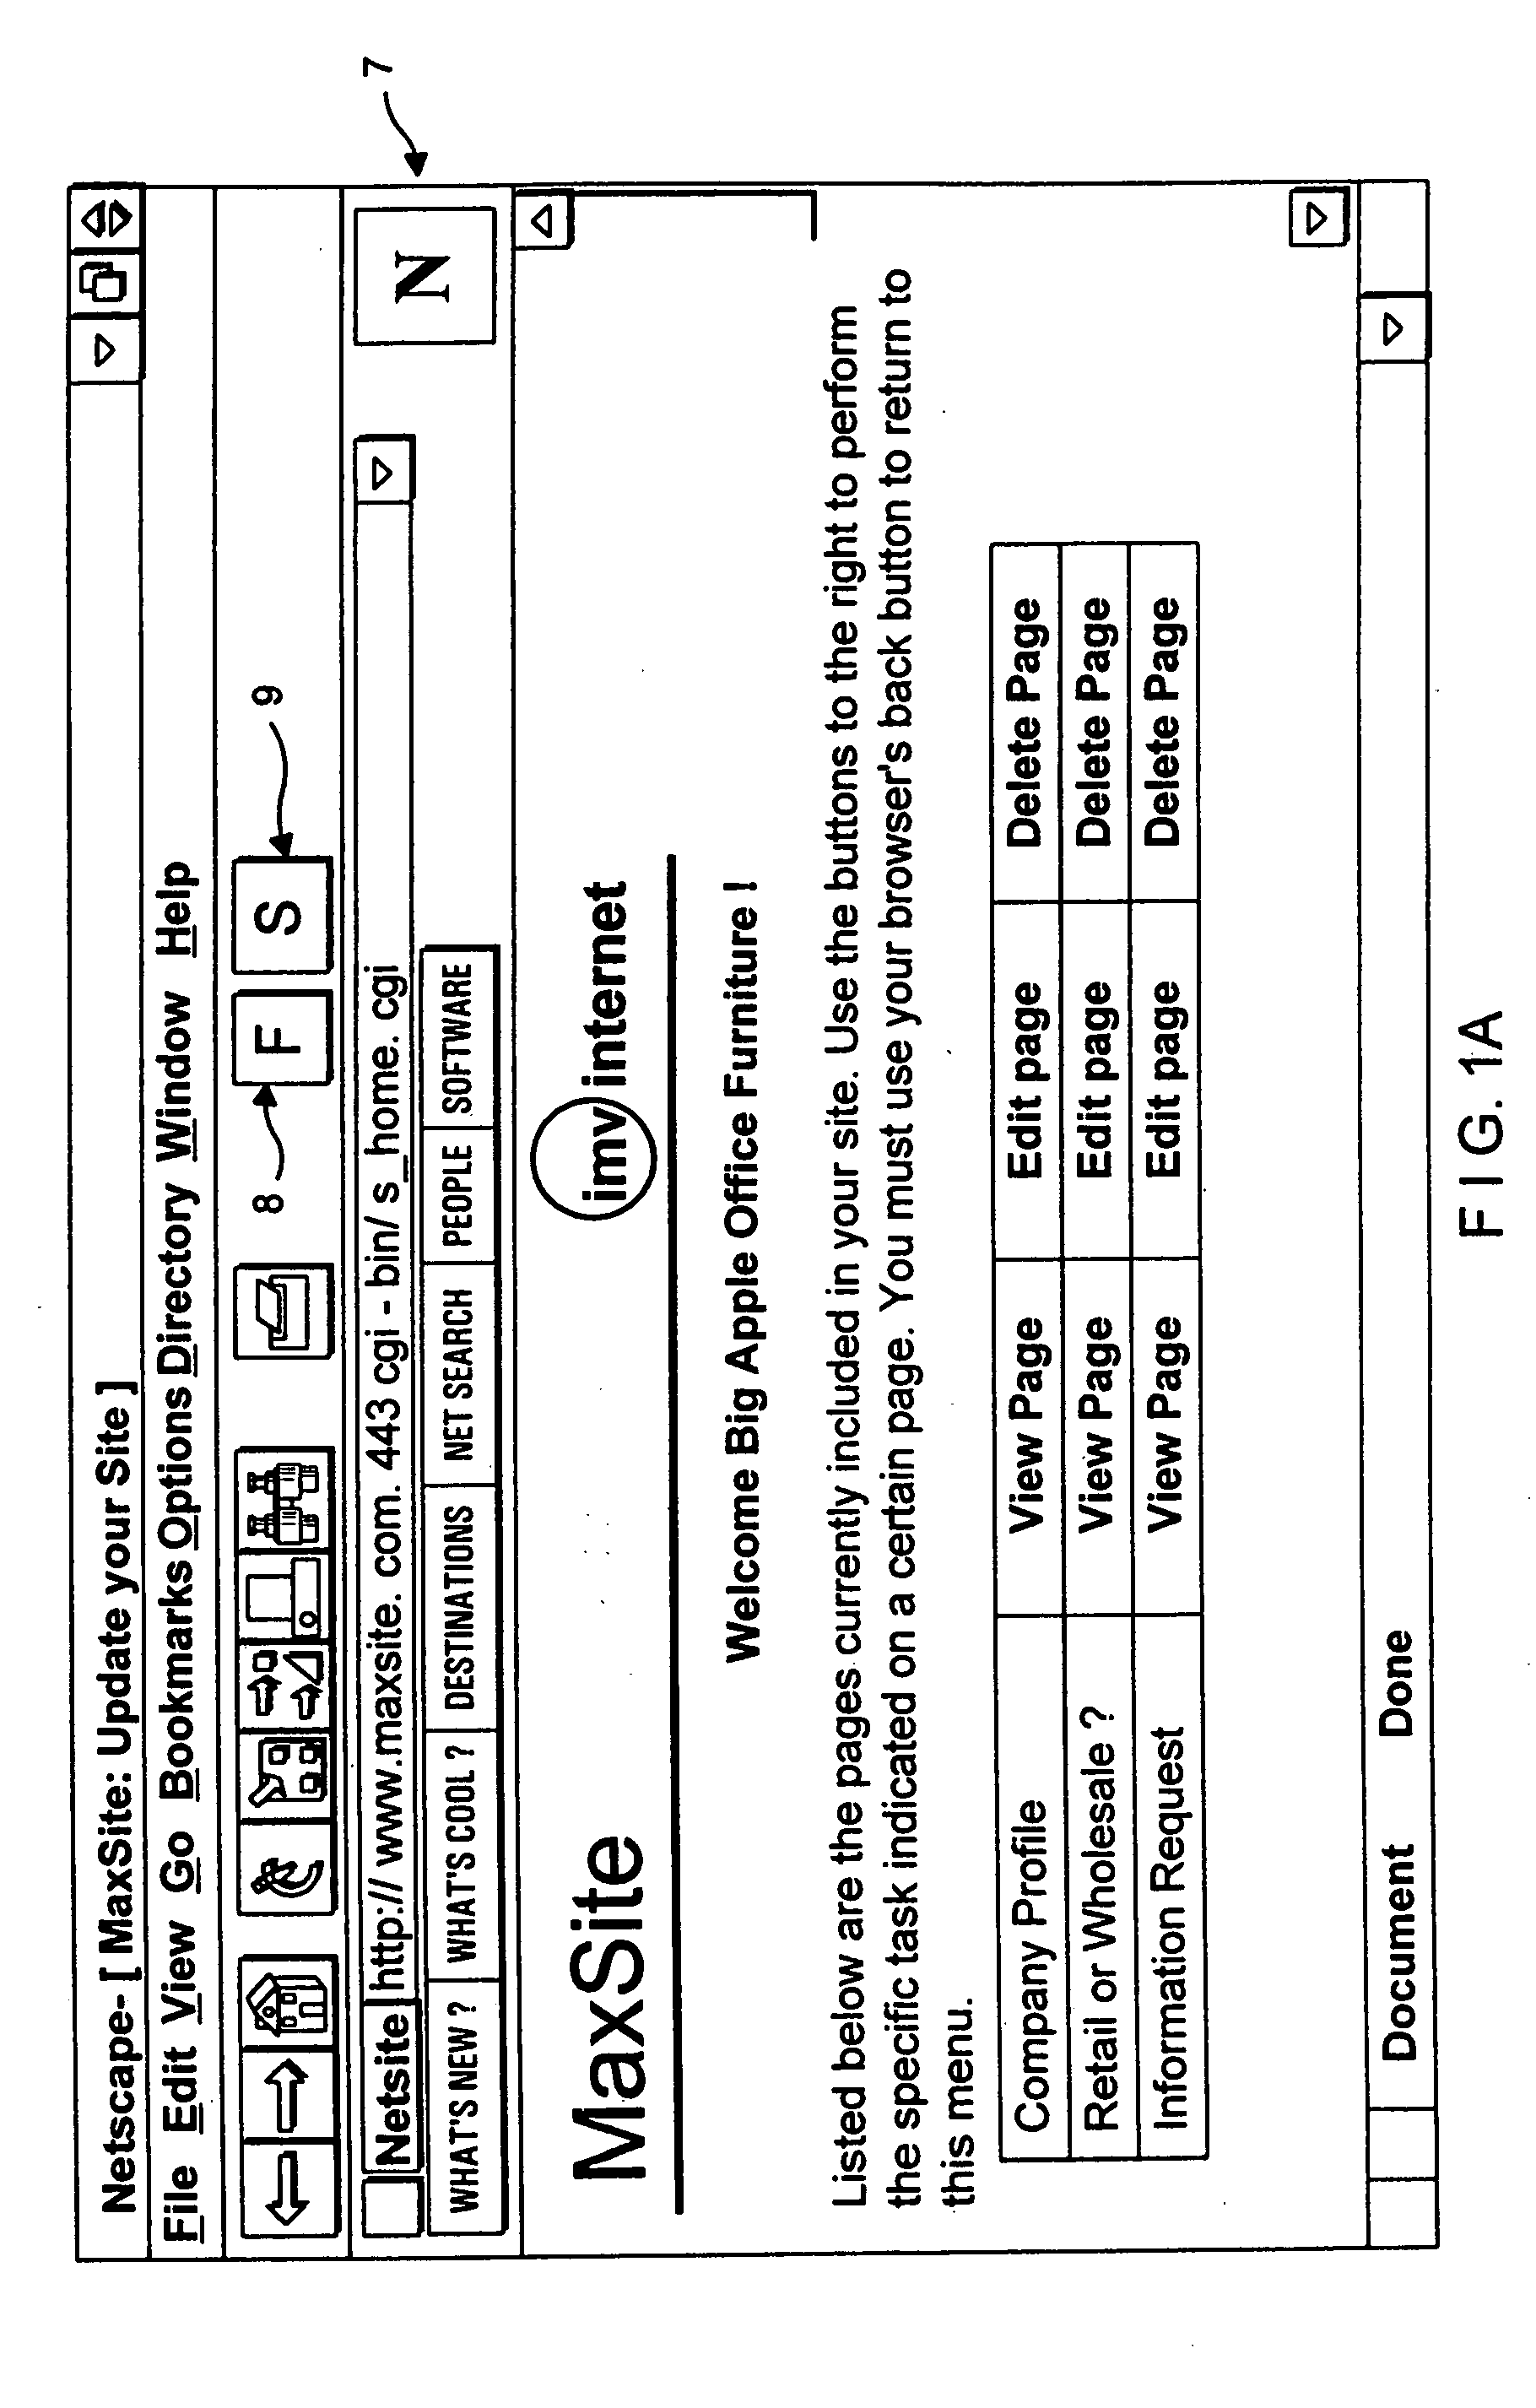 System and method for finding product and service related information on the internet